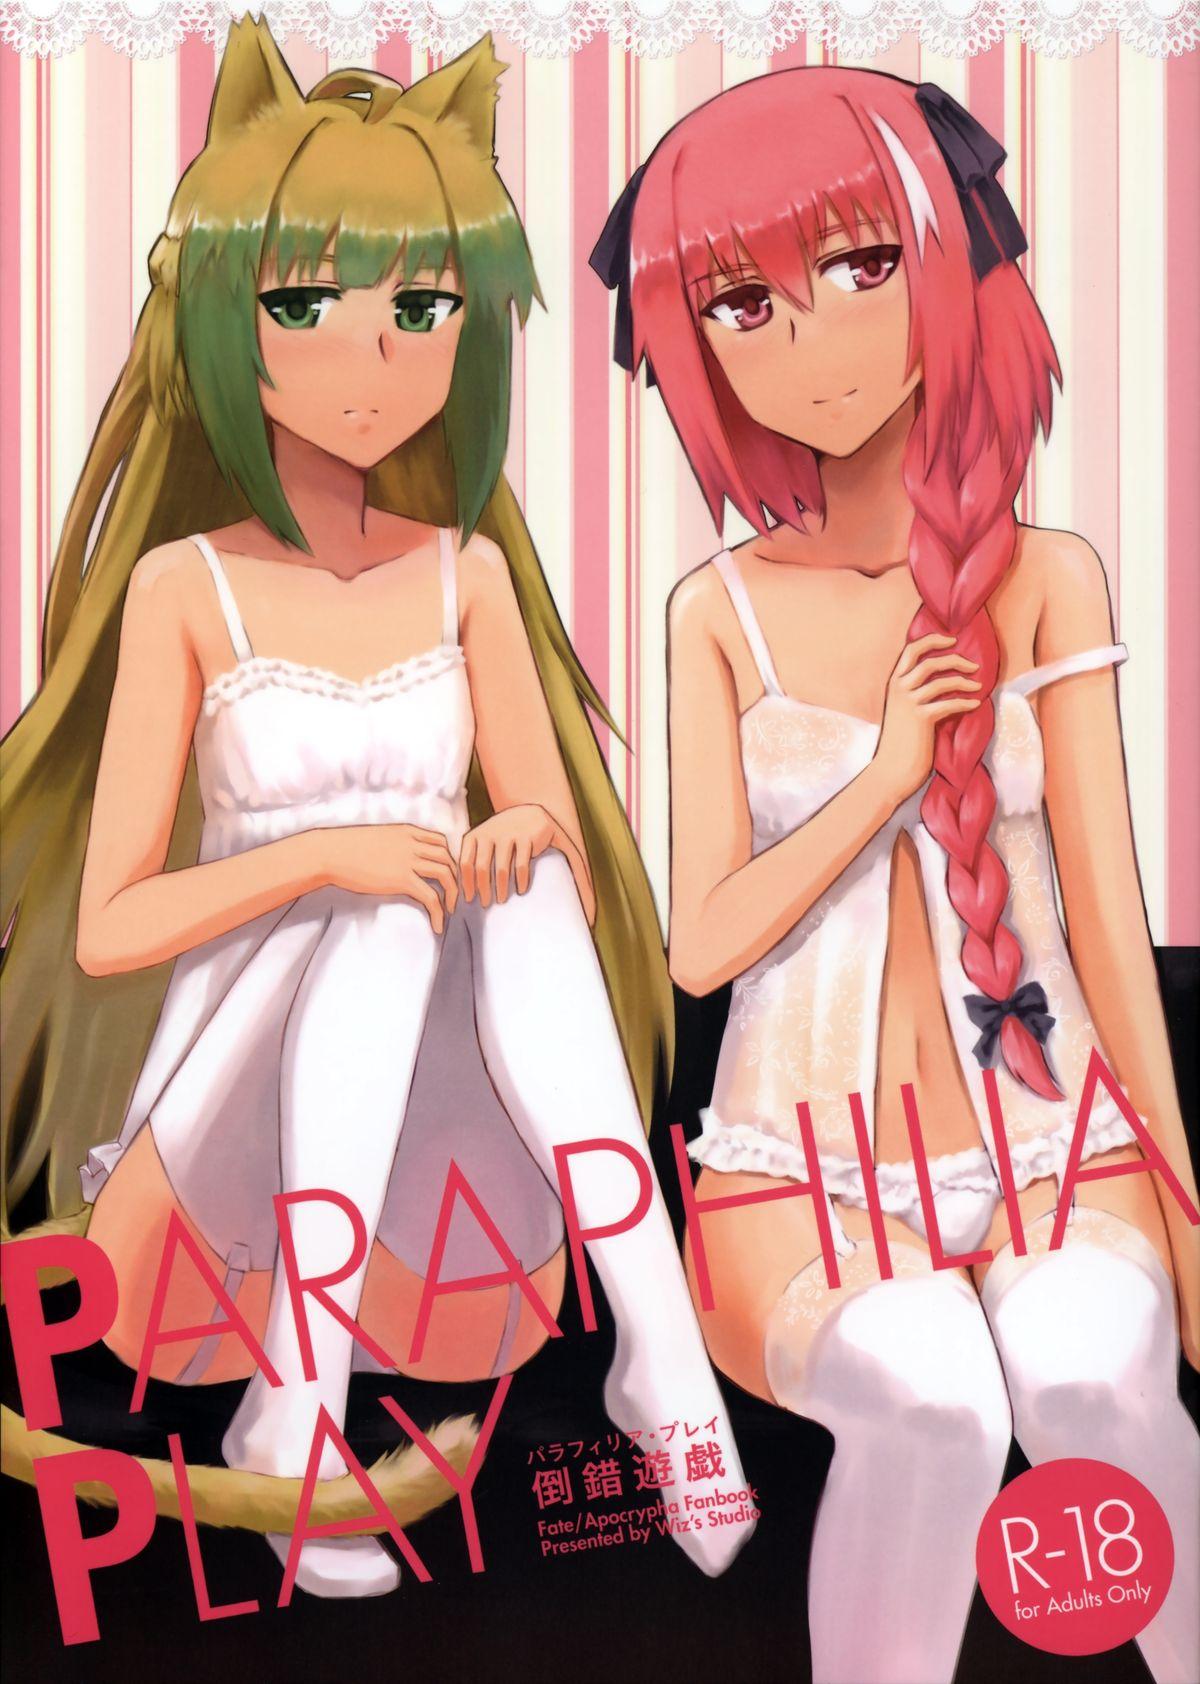 Gay Spank PARAPHILIA PLAY - Fate apocrypha Free Hardcore Porn - Picture 1